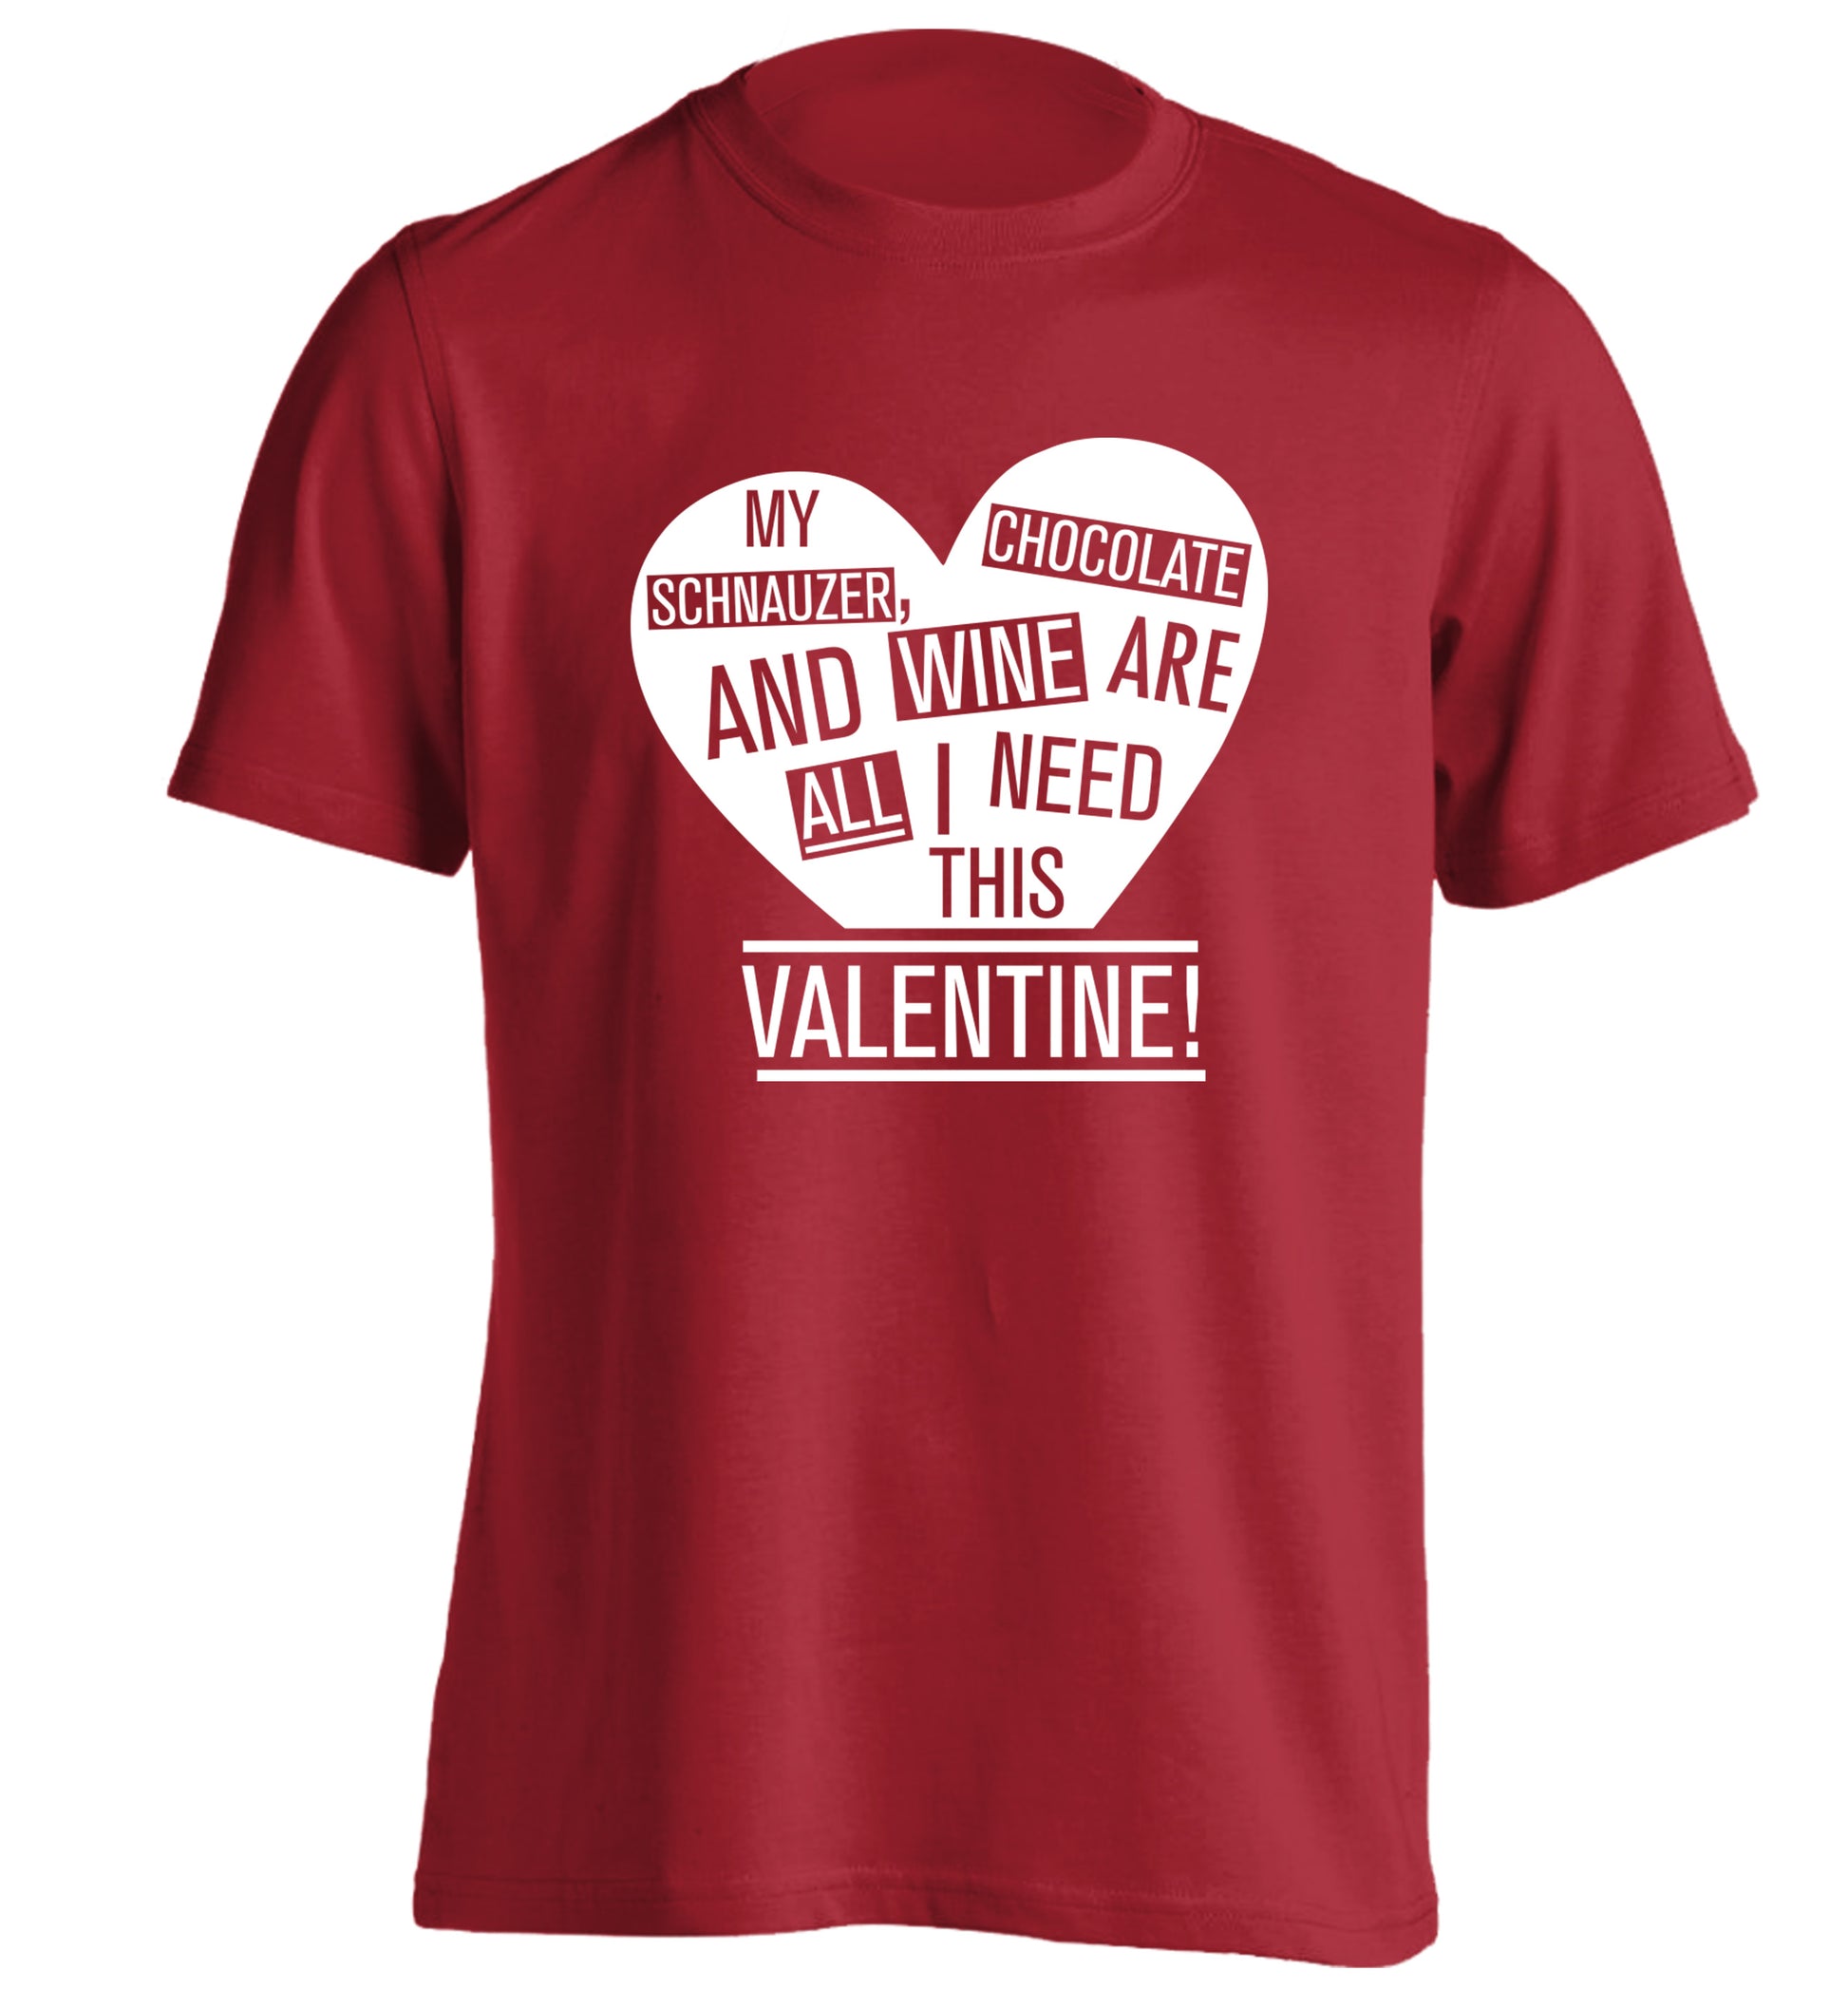 My schnauzer, chocolate and wine are all I need this valentine! adults unisex red Tshirt 2XL